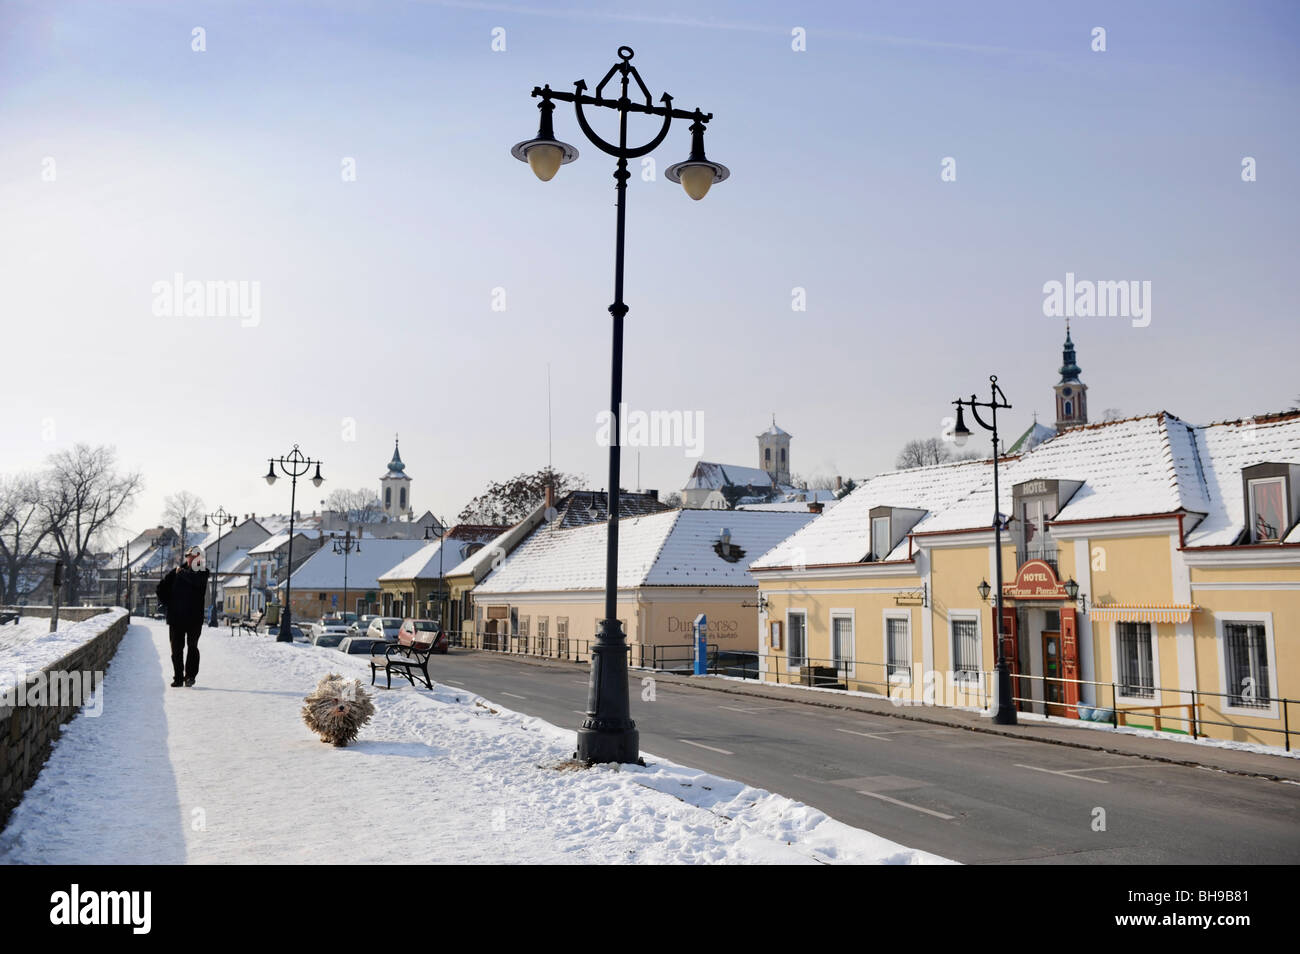 Winter scene in Szentendre Hungary with a man walking a traditional Hungarian Puli Sheepdog Stock Photo